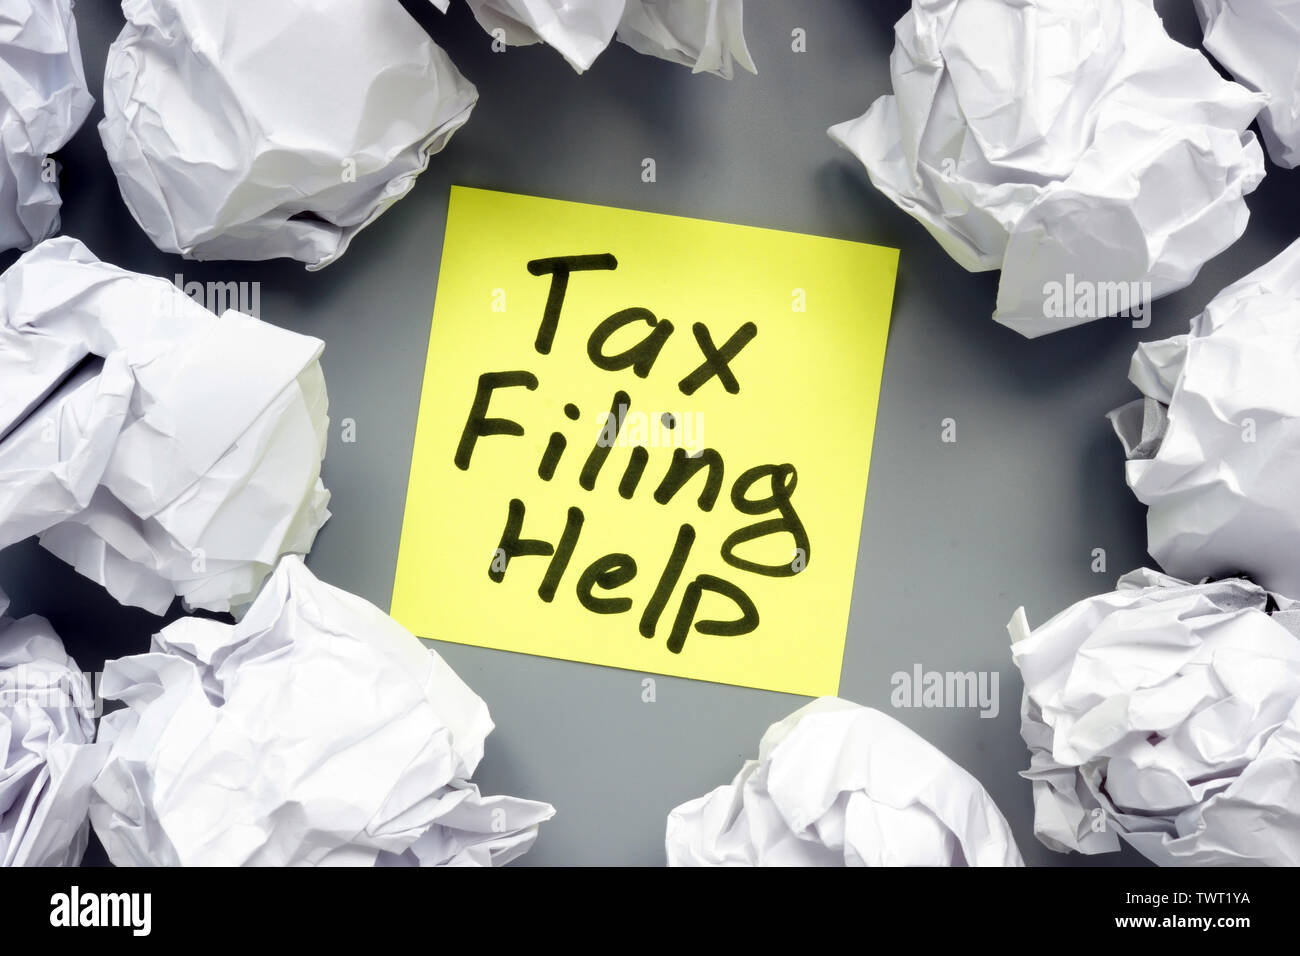 Tax filing help sign and paper balls. Stock Photo